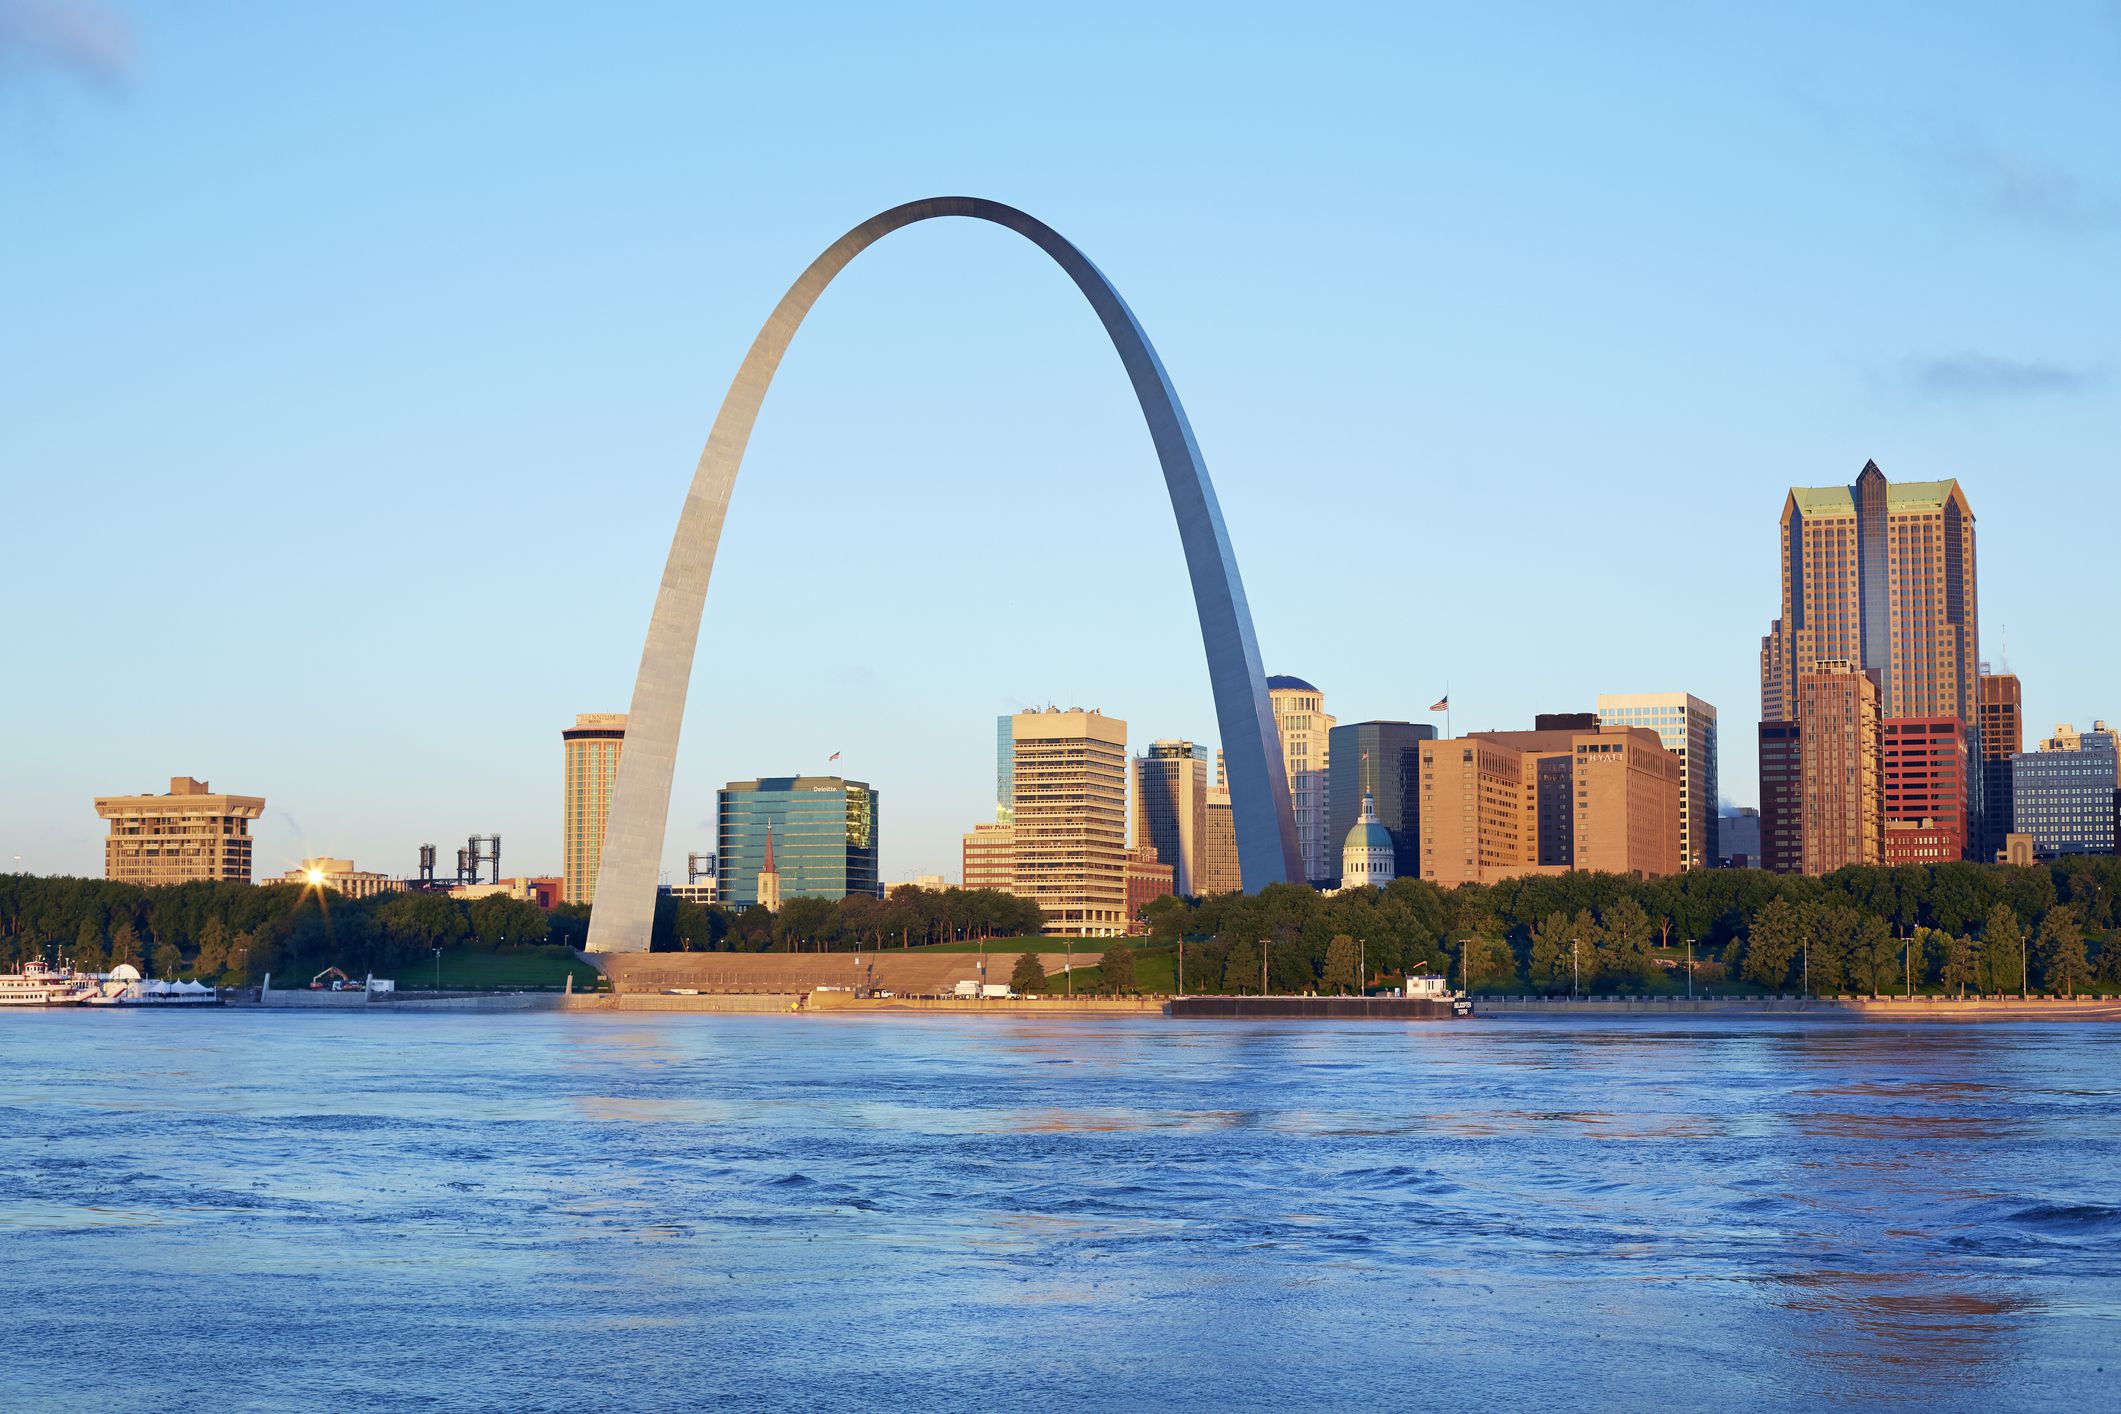 Top 10 Tourist Attractions in St. Louis